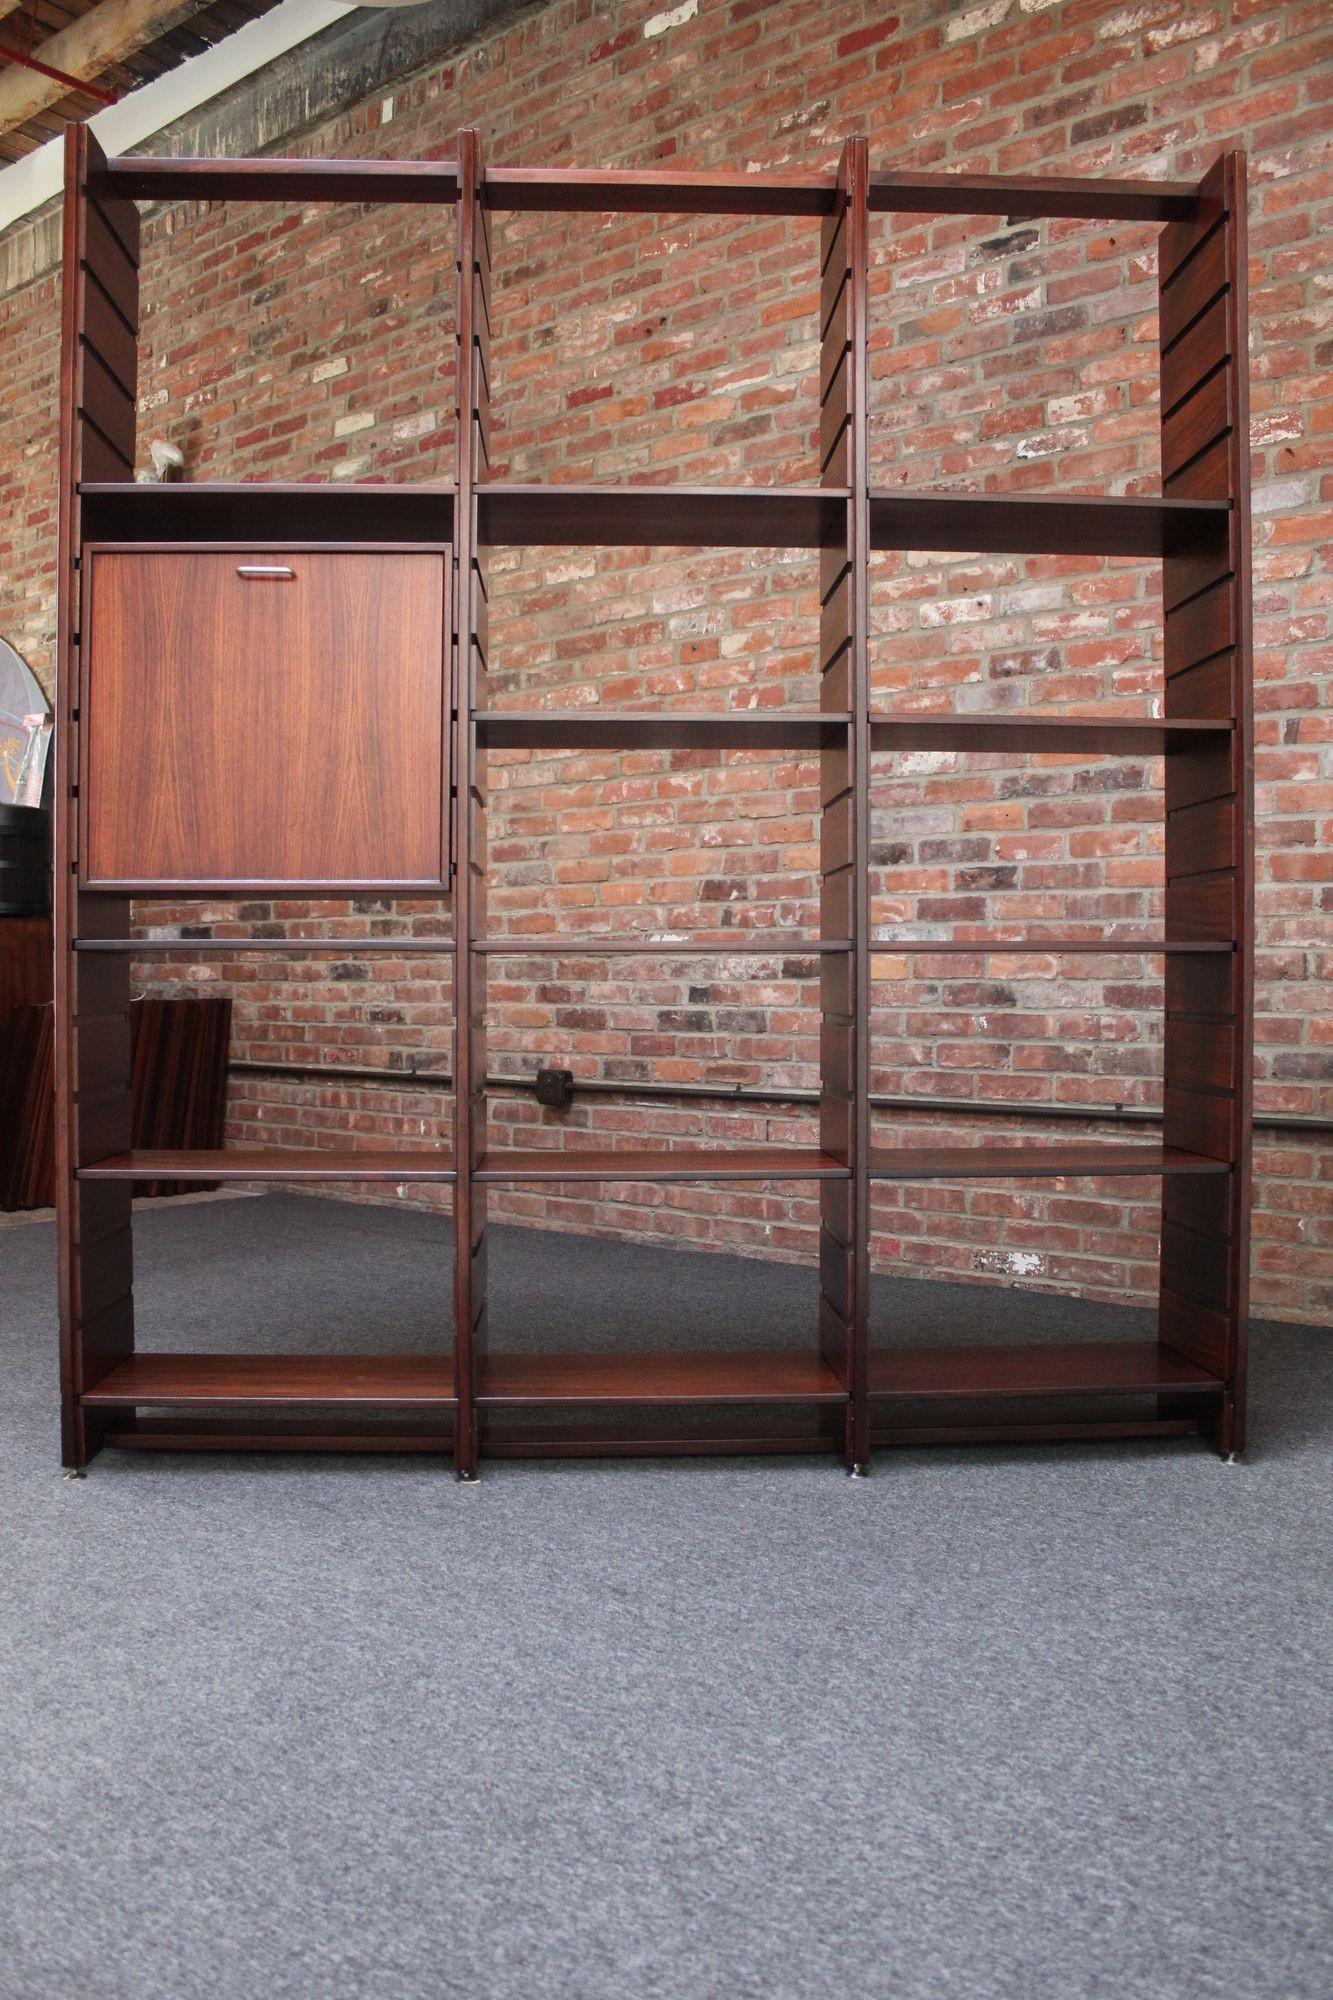 Model 540 modular bookcase designed by Gianfranco Frattini for Bernini (ca. 1960s, Italy).
Uncommon rosewood example composed of four vertical slatted-rails creating three bays including 14 shelves and one drop-down storage/bar cabinet with a